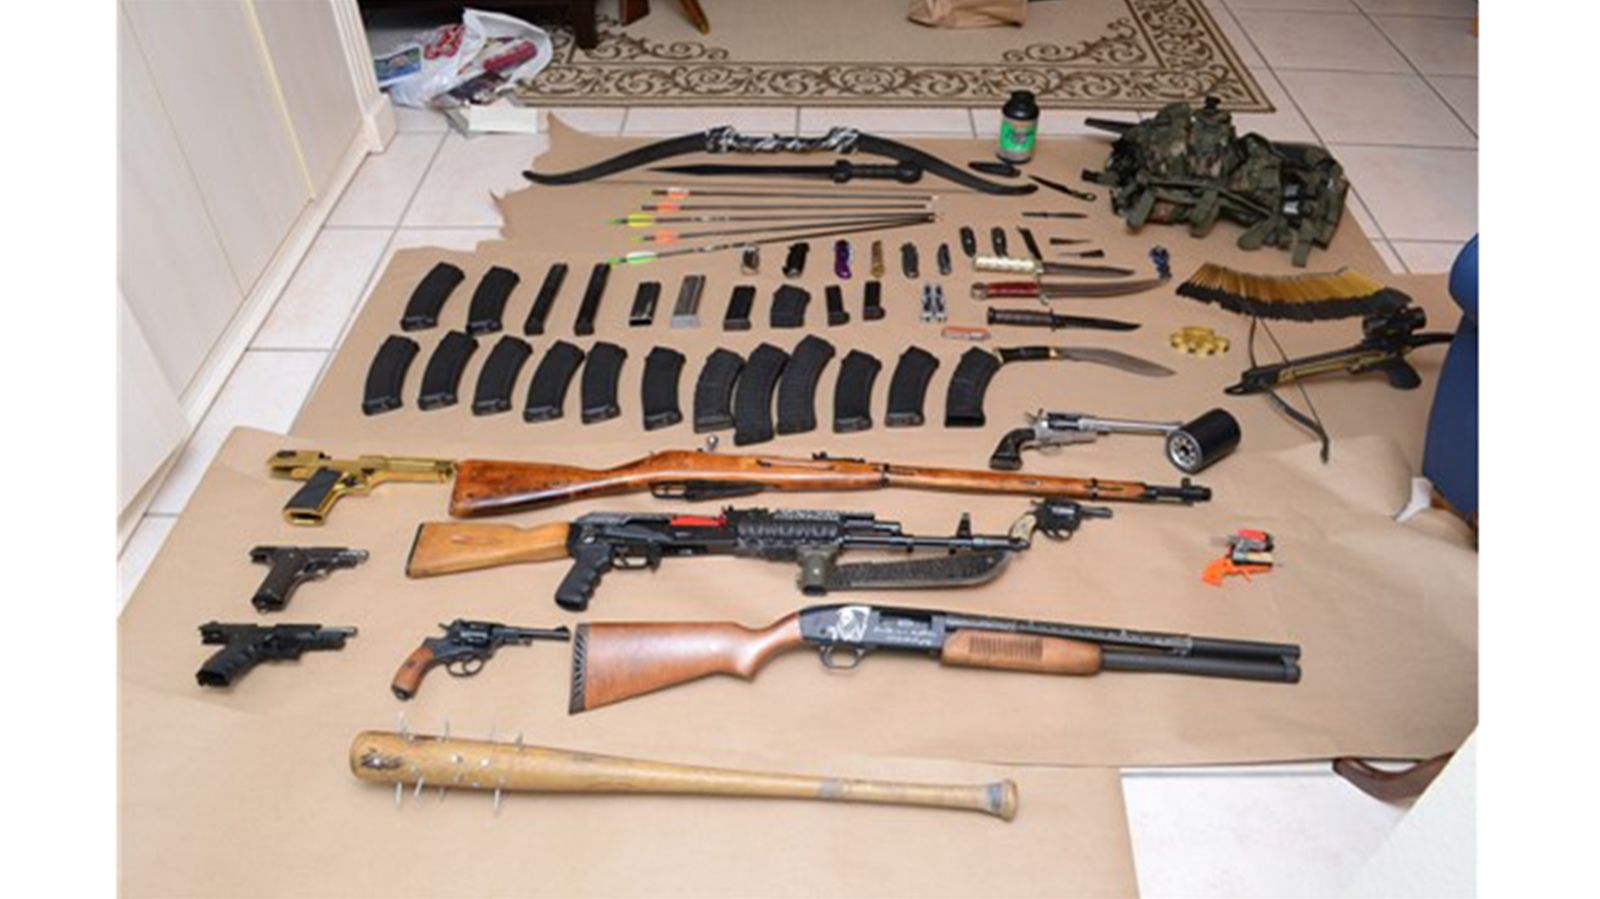 Homemade Toddler - Florida child porn probe uncovers weapons stash, sheriff says | CNN